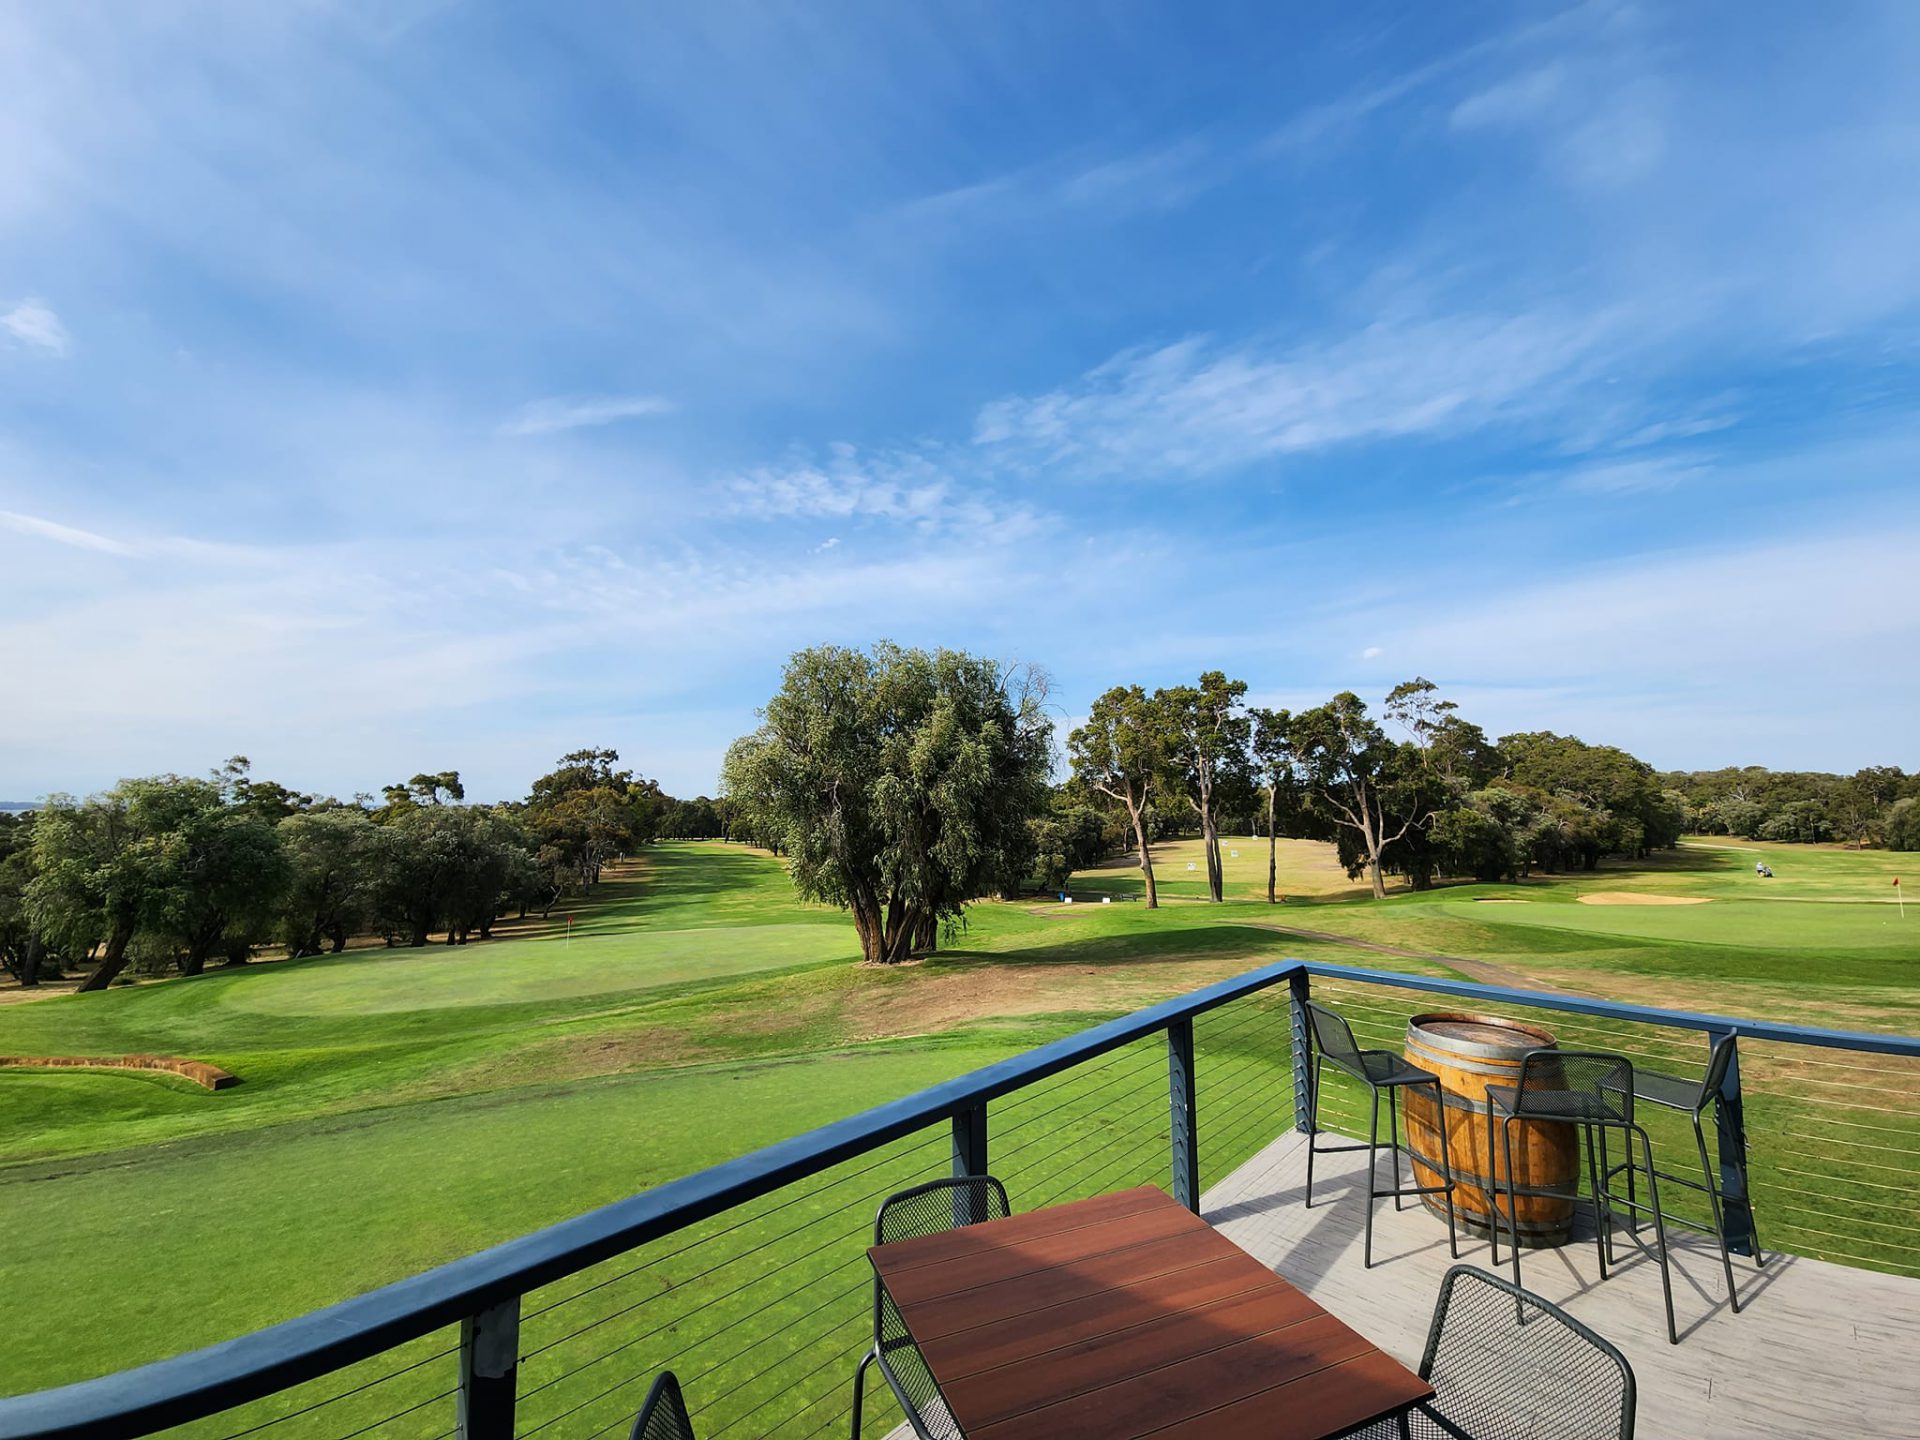 Image of the Bunbury Golf Course overlooking the green from the outside balcony at the restaurant